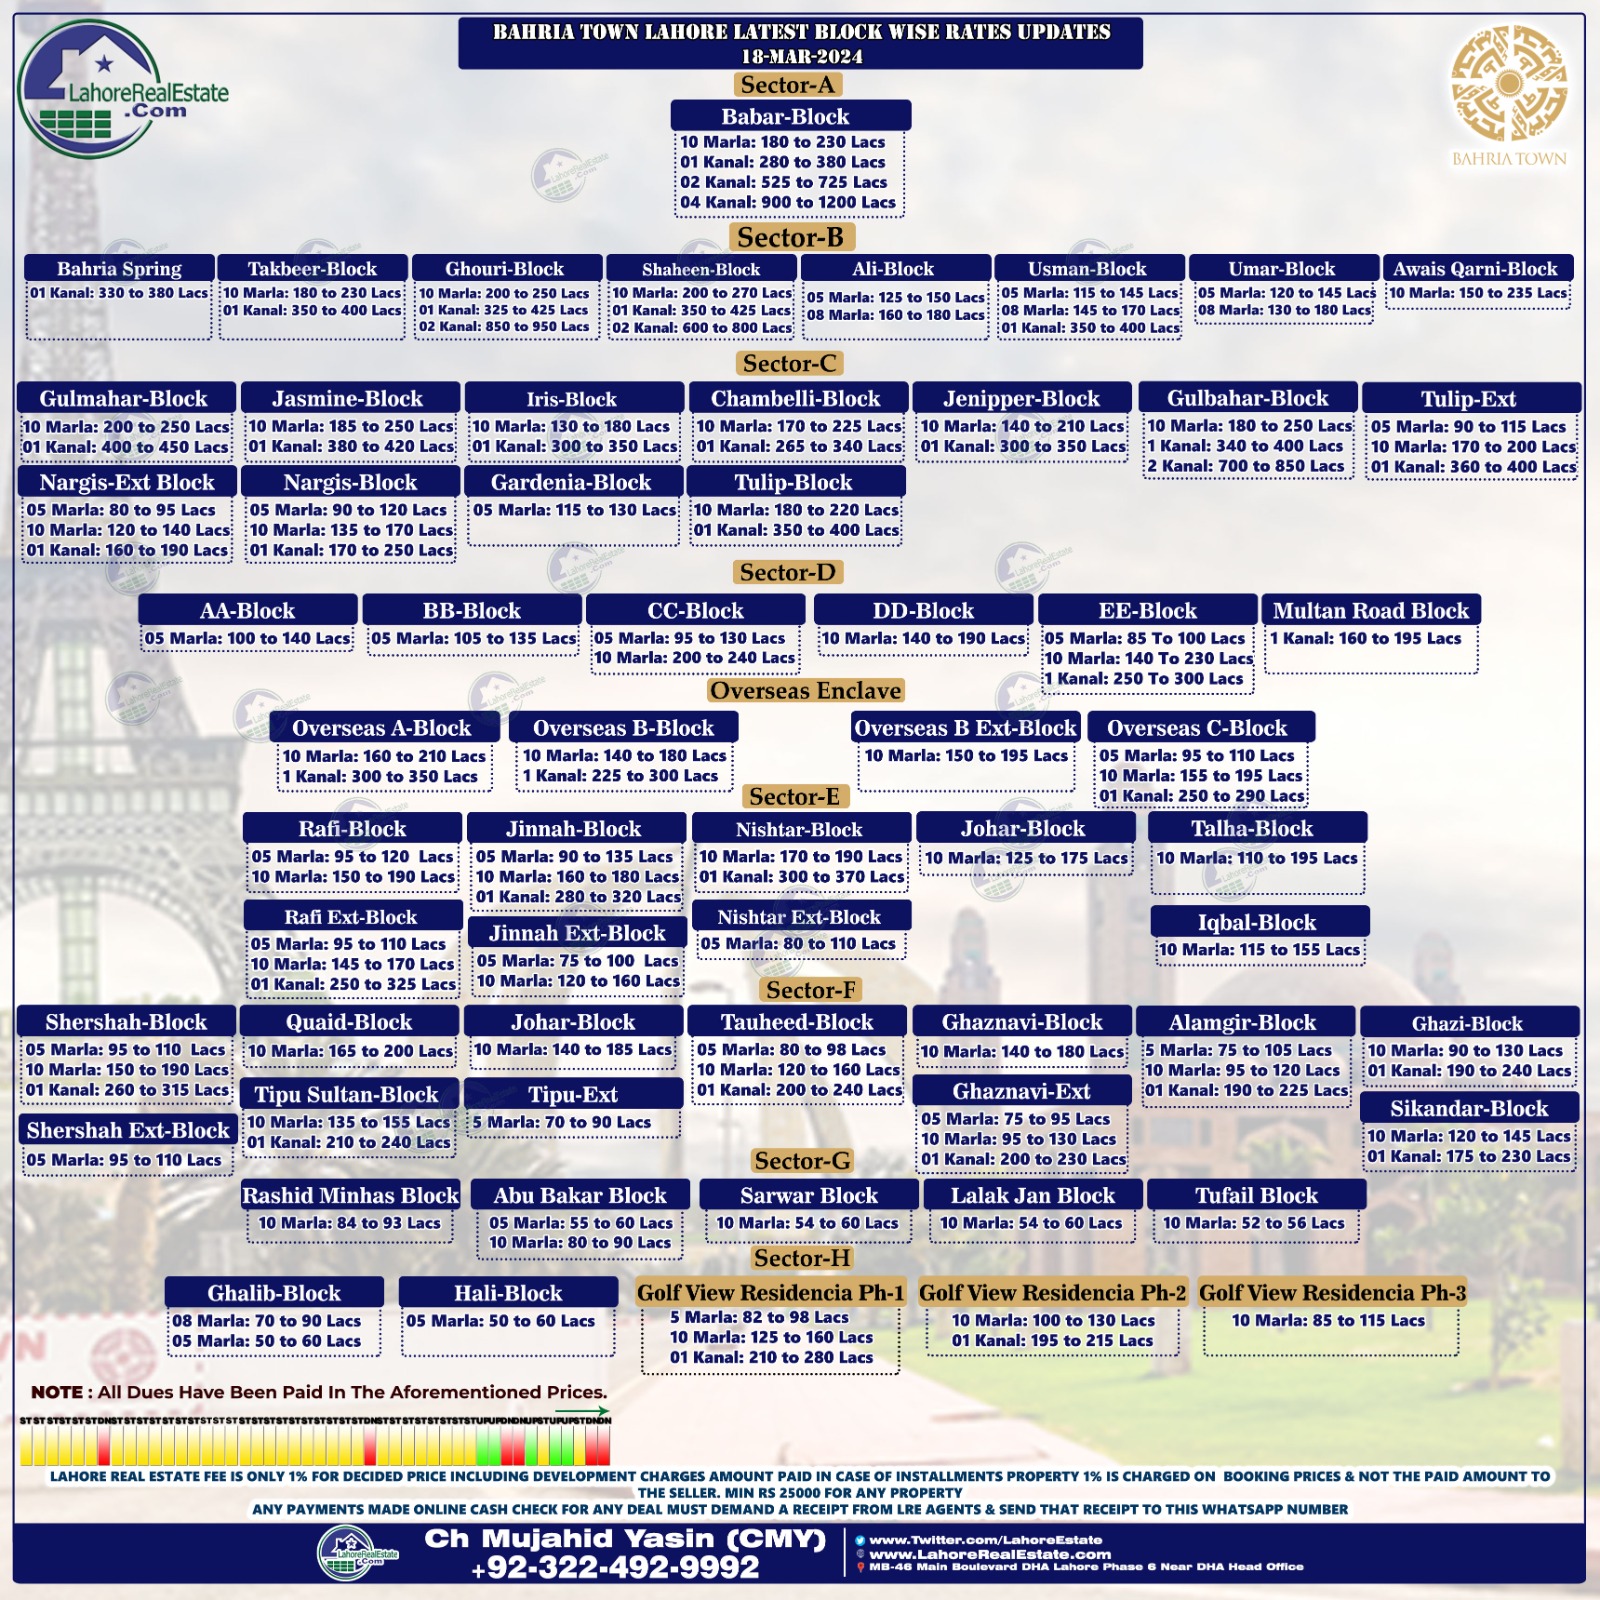 Bahria Town Lahore Plot Prices Update March 20, 2024